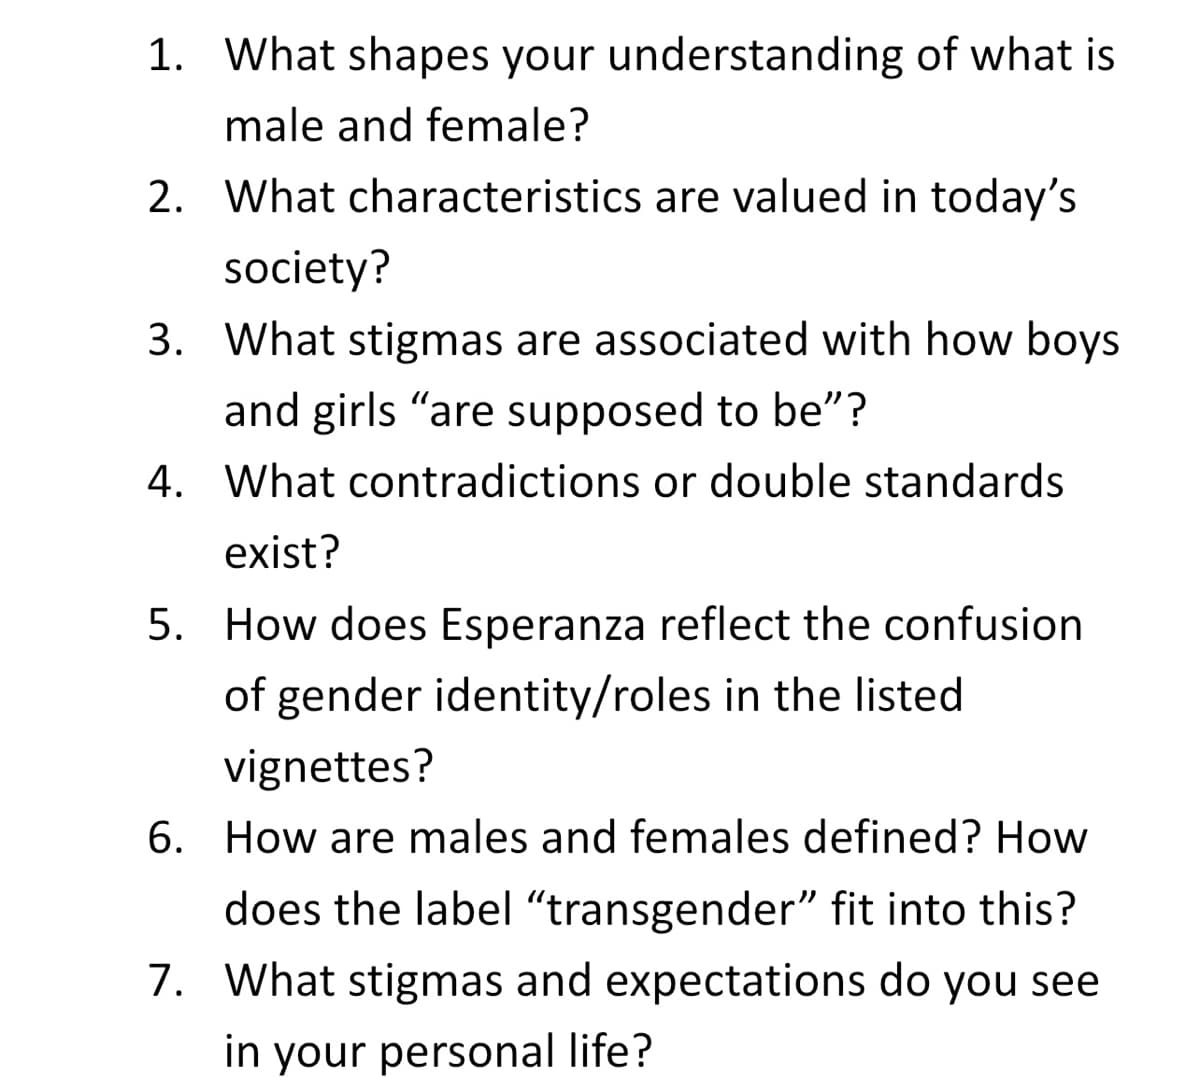 1. What shapes your understanding of what is
male and female?
2. What characteristics are valued in today's
society?
3. What stigmas are associated with how boys
and girls "are supposed to be"?
4. What contradictions or double standards
exist?
5. How does Esperanza reflect the confusion
of gender identity/roles in the listed
vignettes?
6. How are males and females defined? How
does the label “transgender” fit into this?
7. What stigmas and expectations do you see
in your personal life?